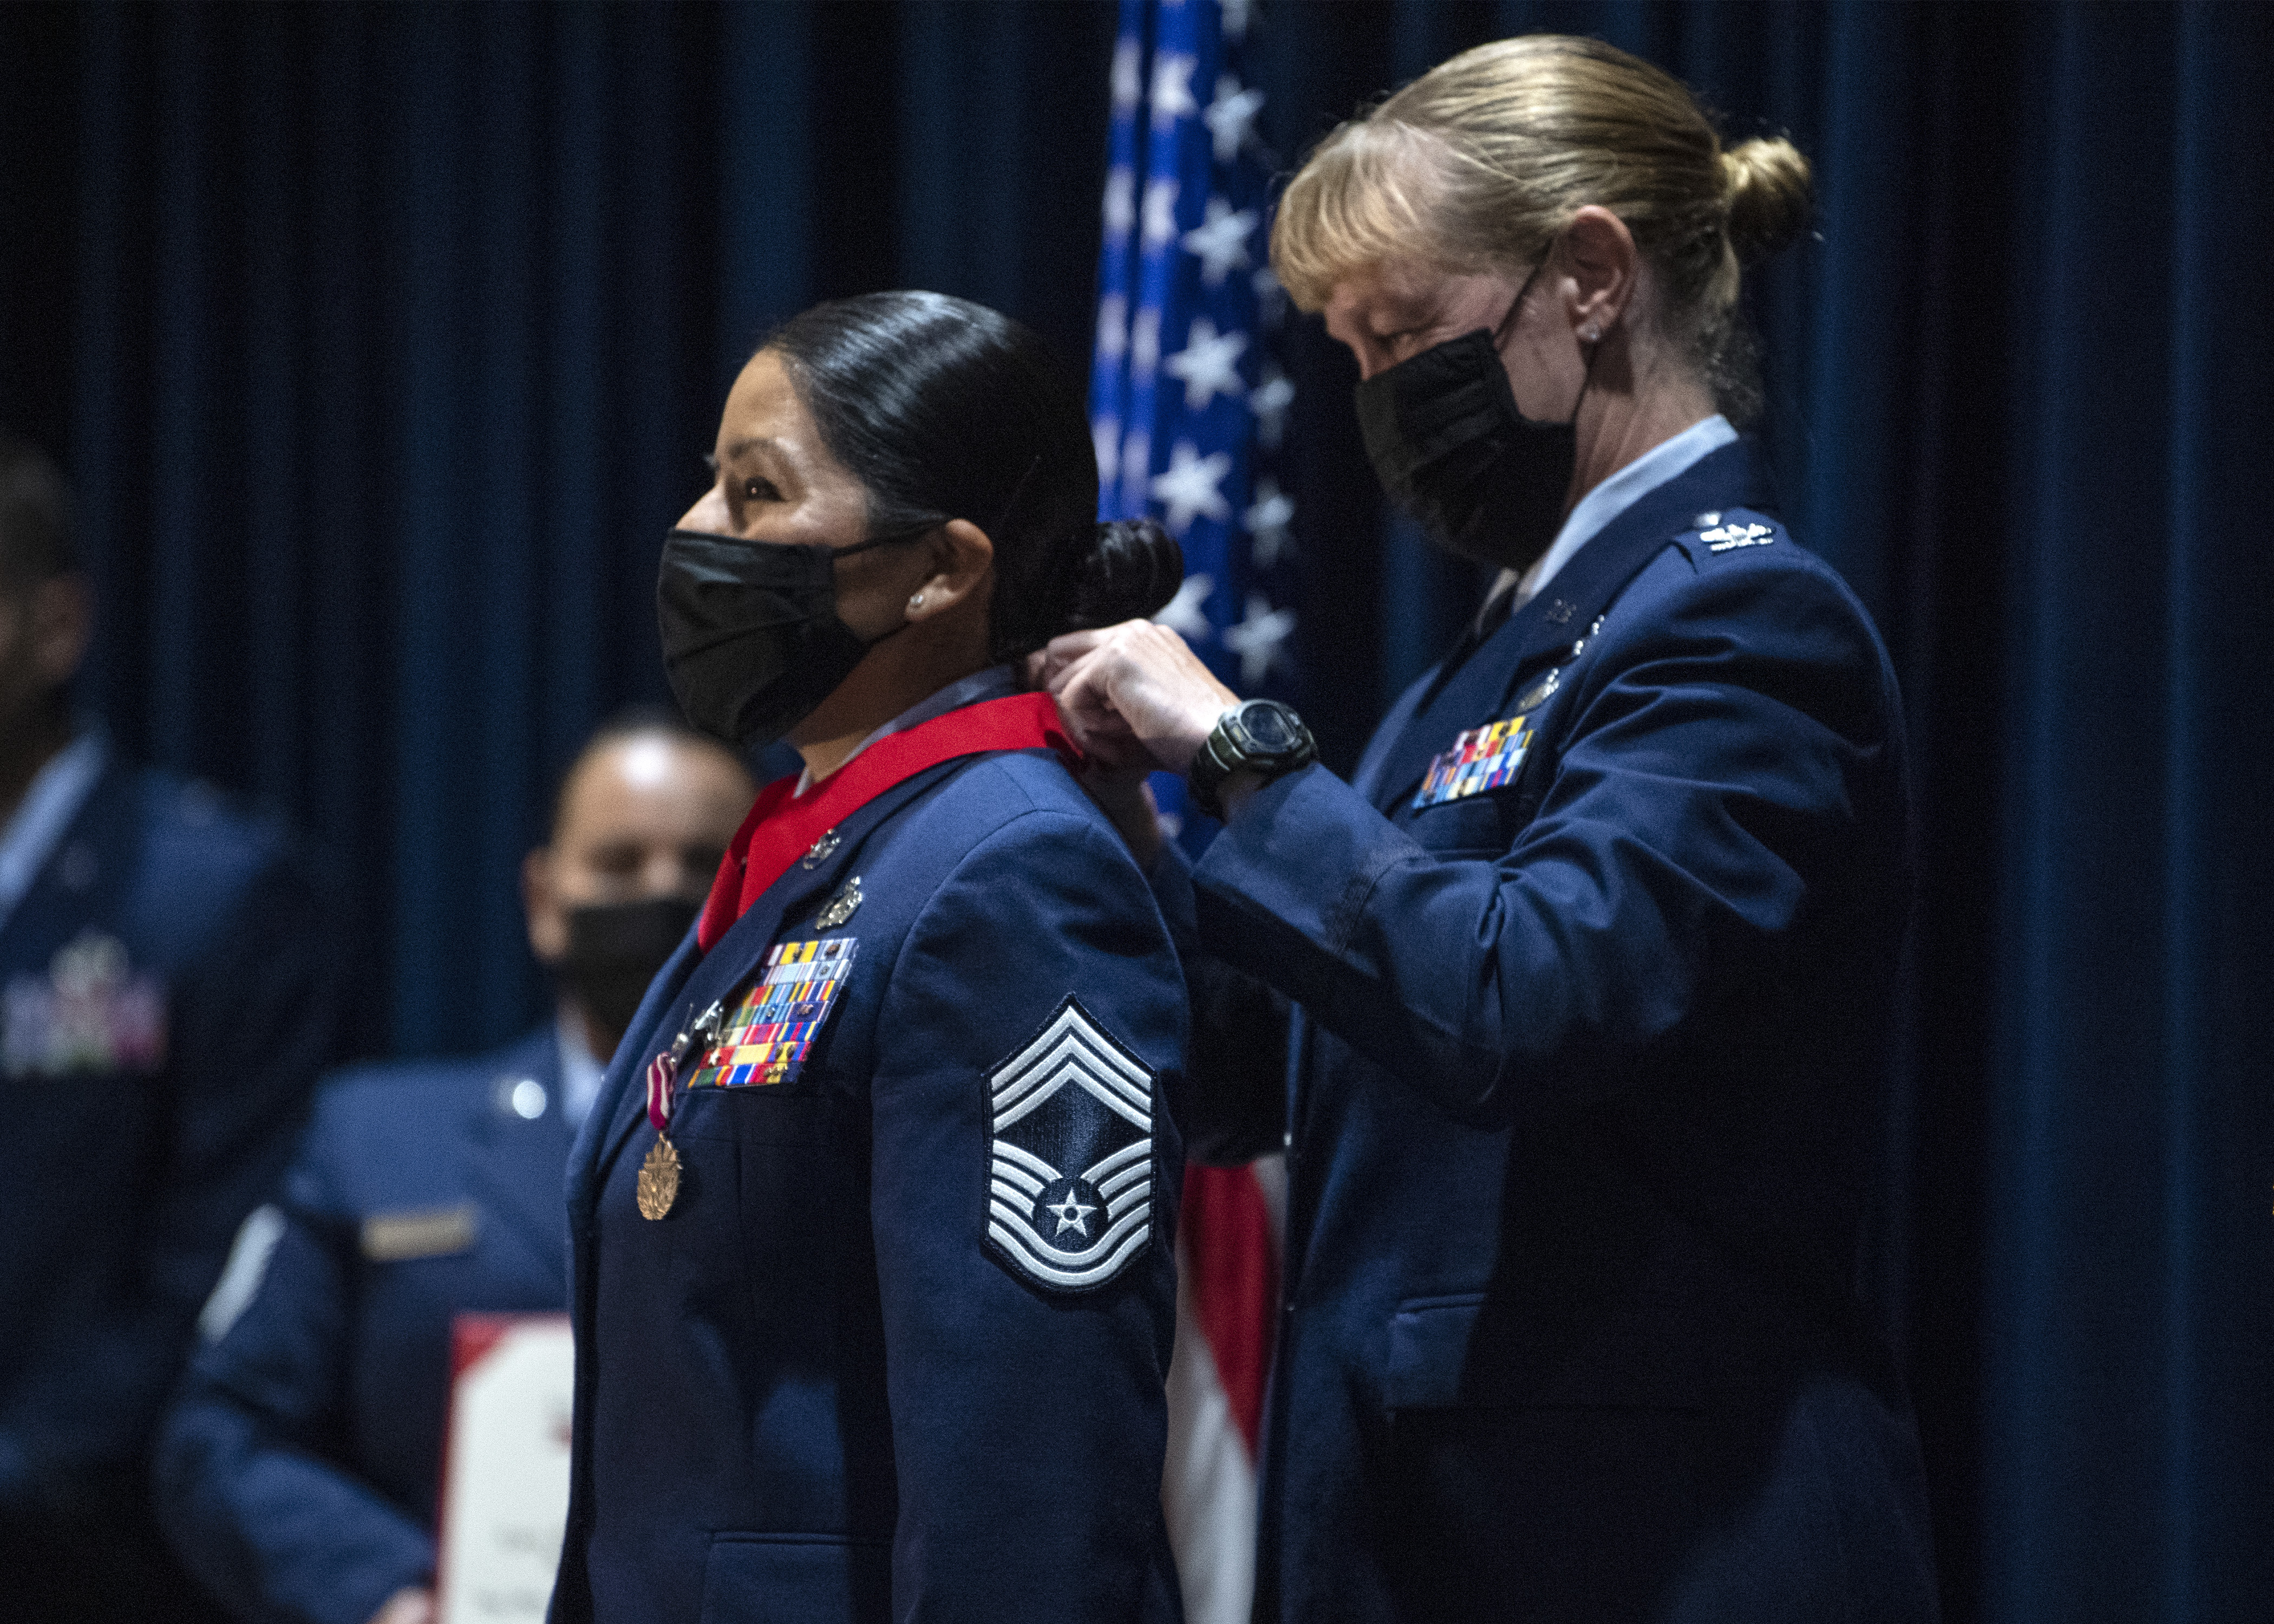 Chief Master Sgt. Michelle Echavarria retires after 24 years of service